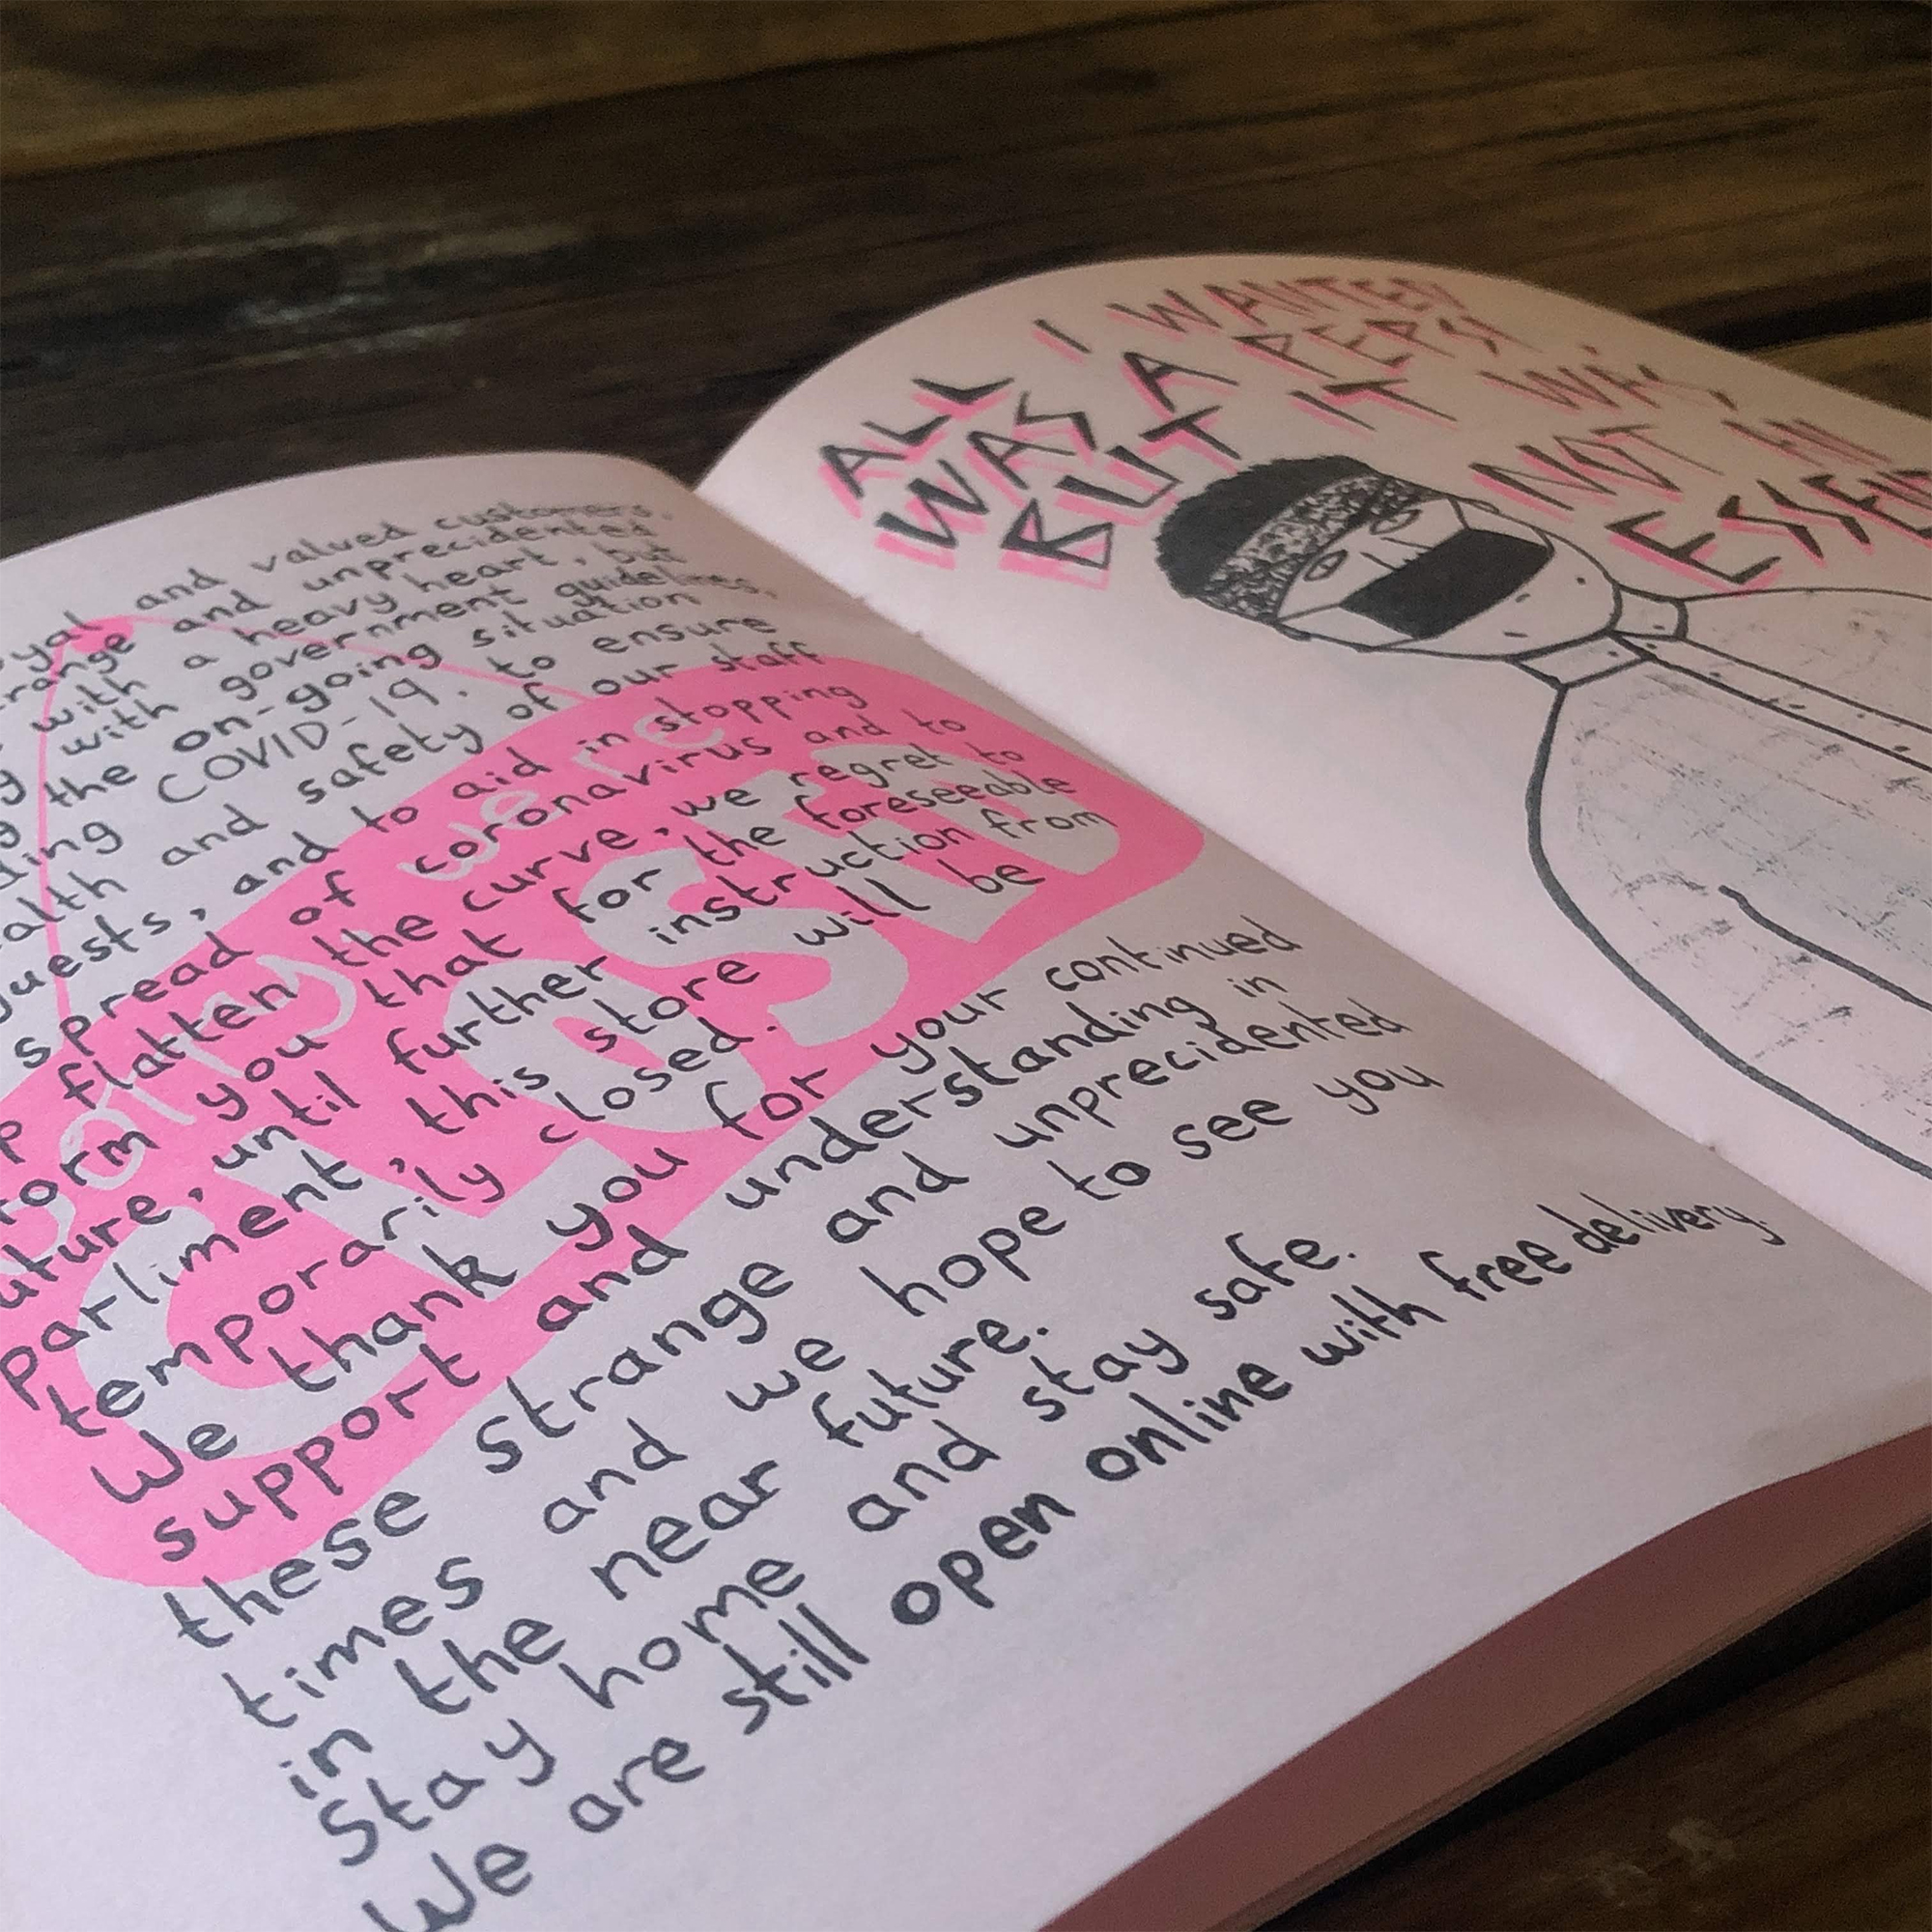 A close up photograph showing a risograph zine printed in pink and black